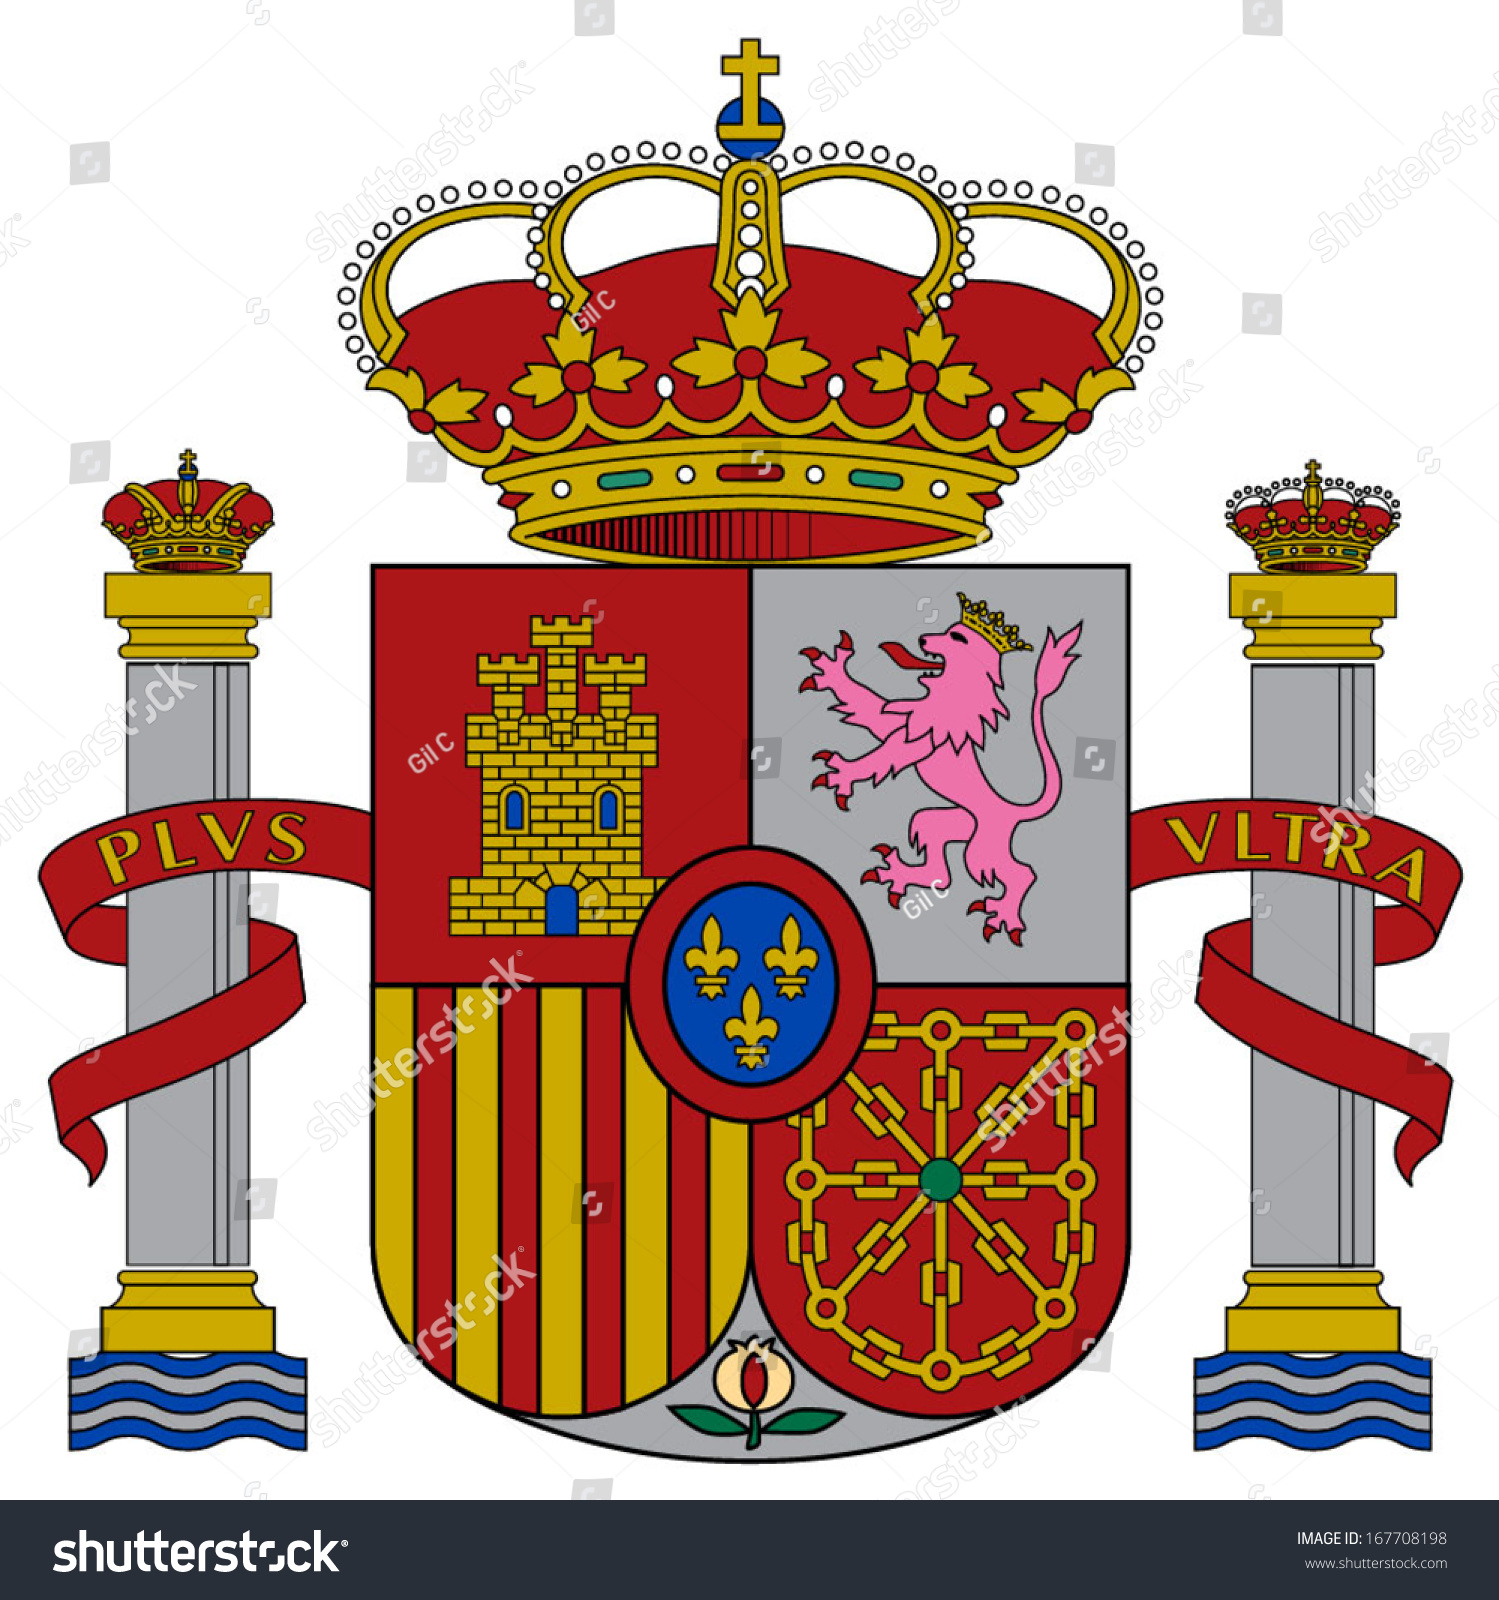 Coat Arms Spain Vector Accurate Dimensions Stock Vector 167708198 ...